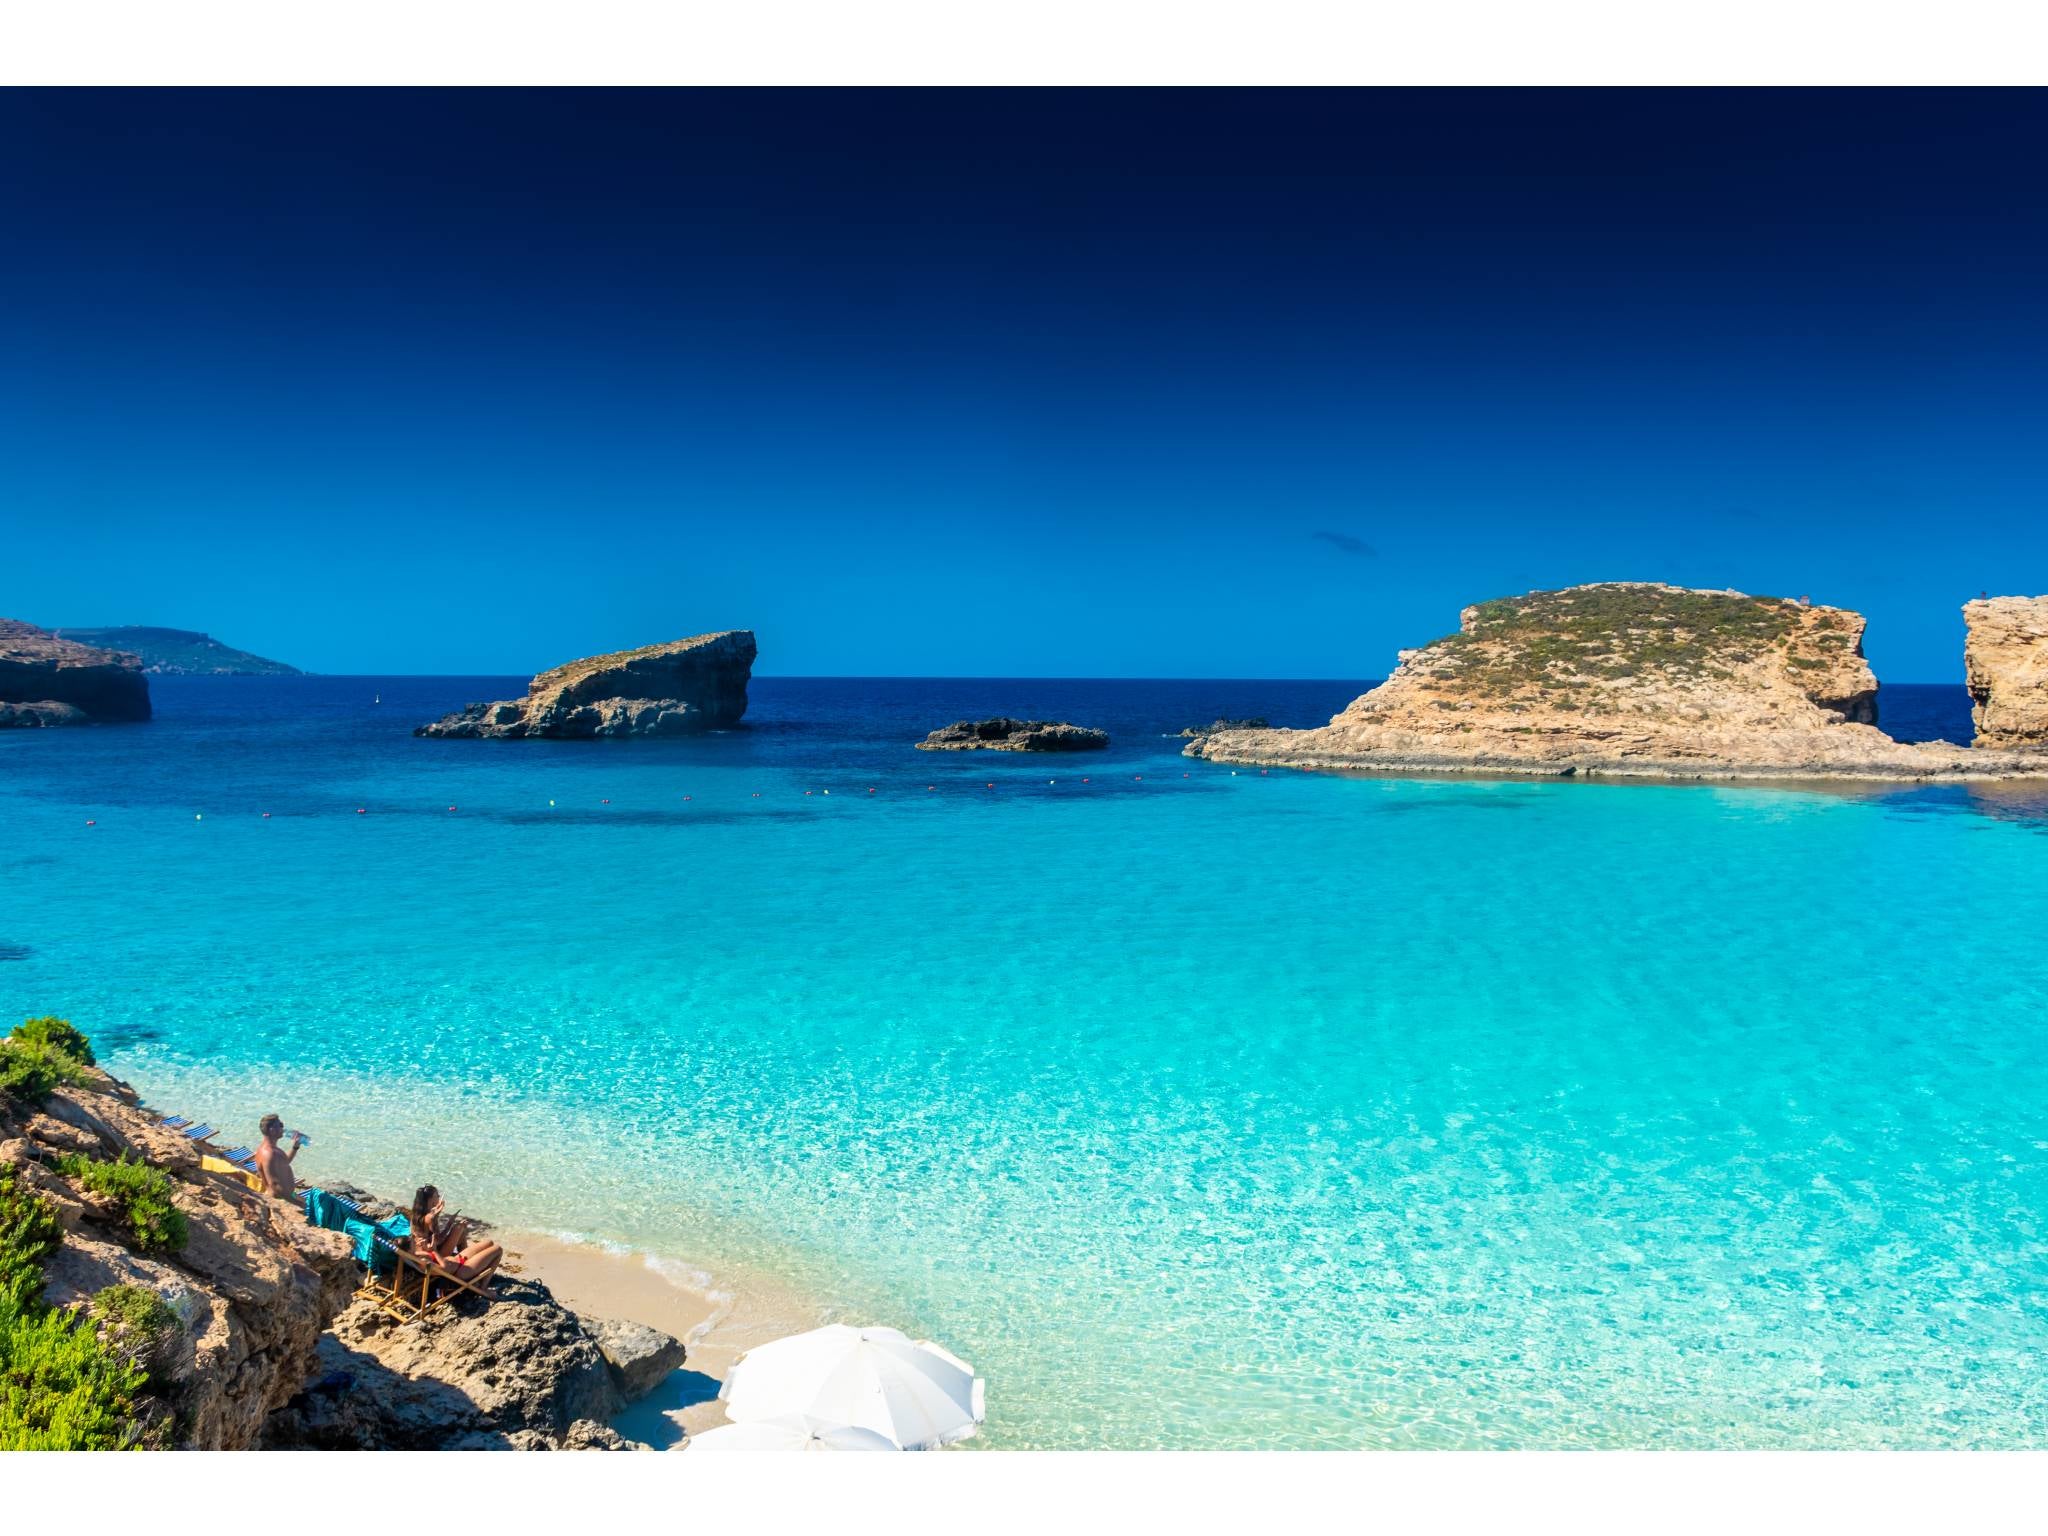 Take a dip in Comino’s turquoise bay